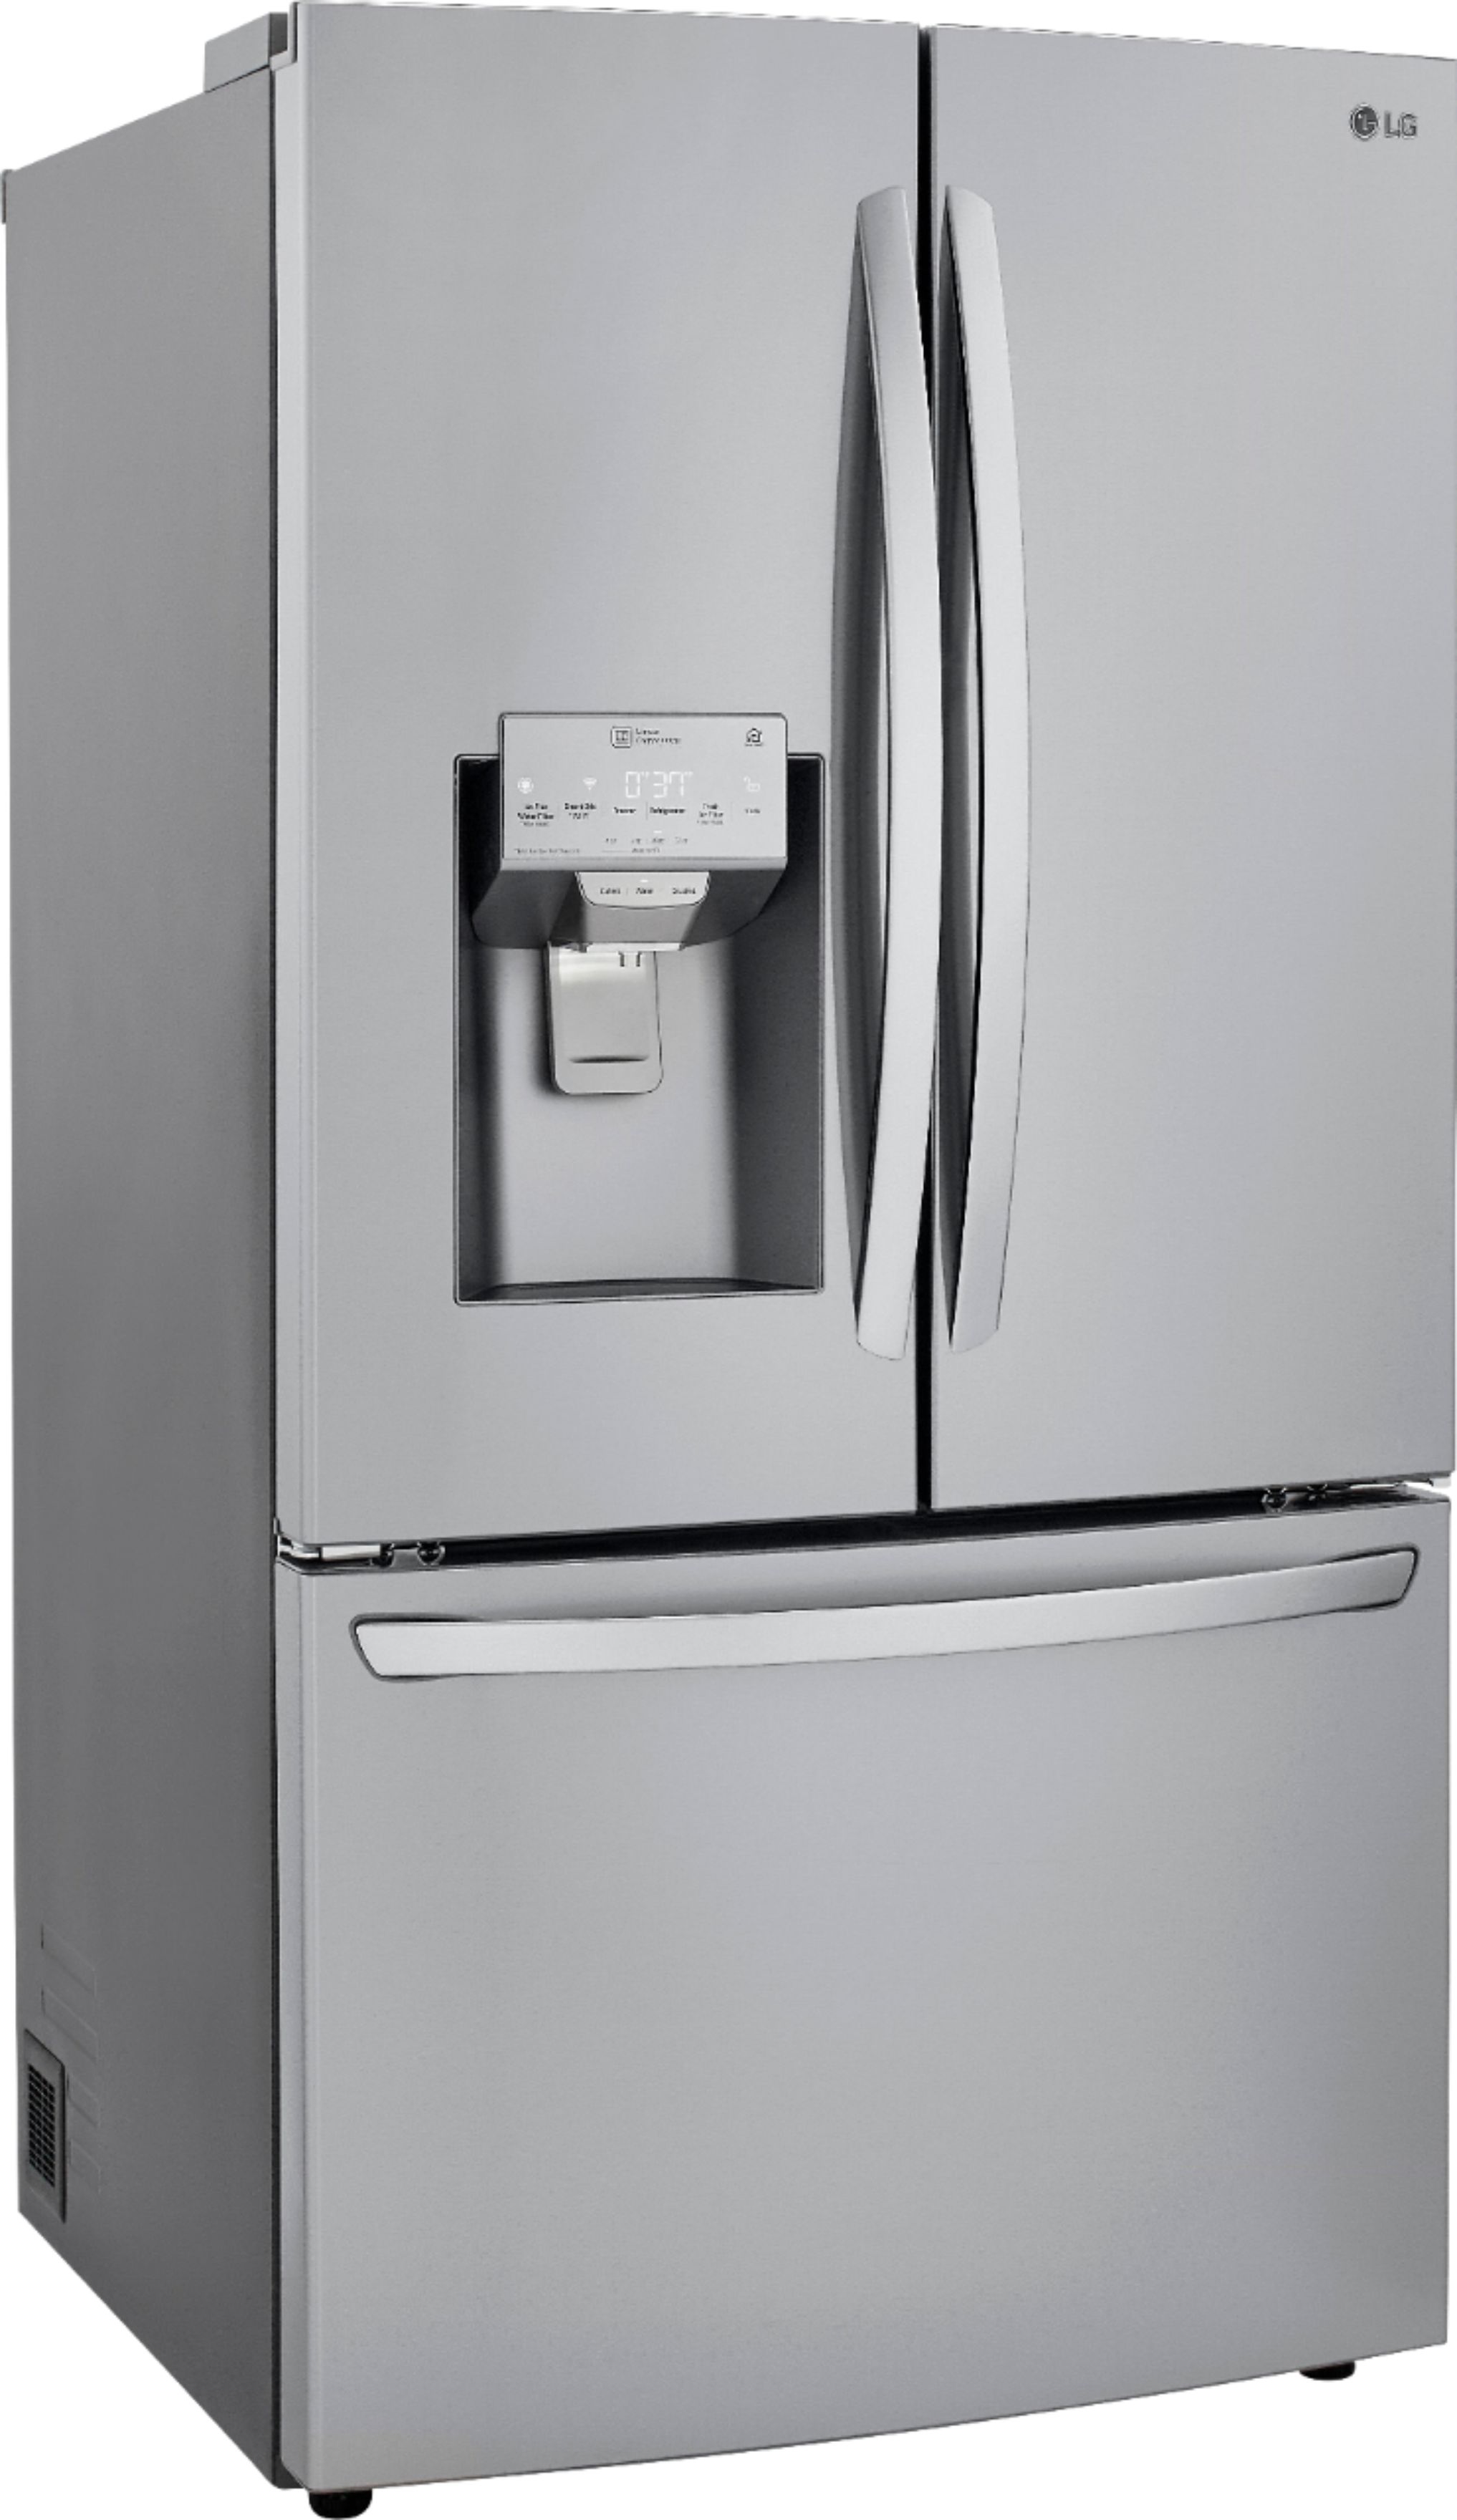 Angle View: LG - 23.5 Cu. Ft. French Door Counter-Depth Smart Refrigerator with Craft Ice - Stainless steel